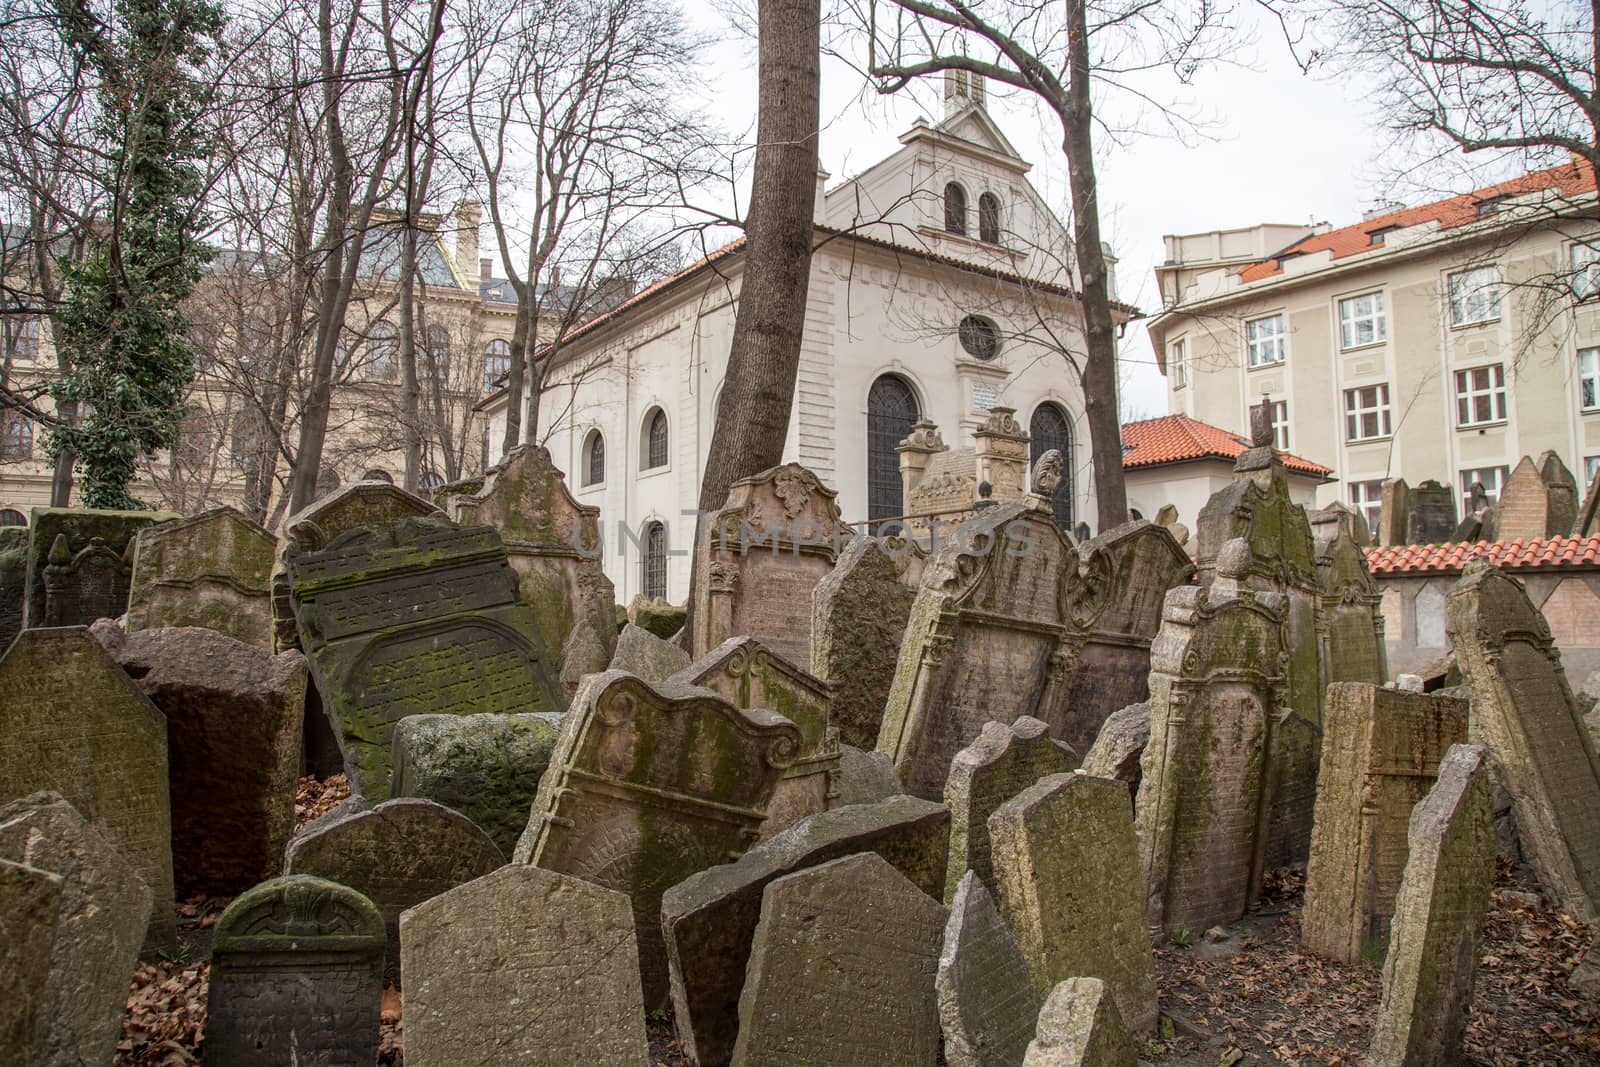 Prague, Czech Republic - March 17, 2017: Tombstones on the Old Jewish Cemetery in the Jewish quarter